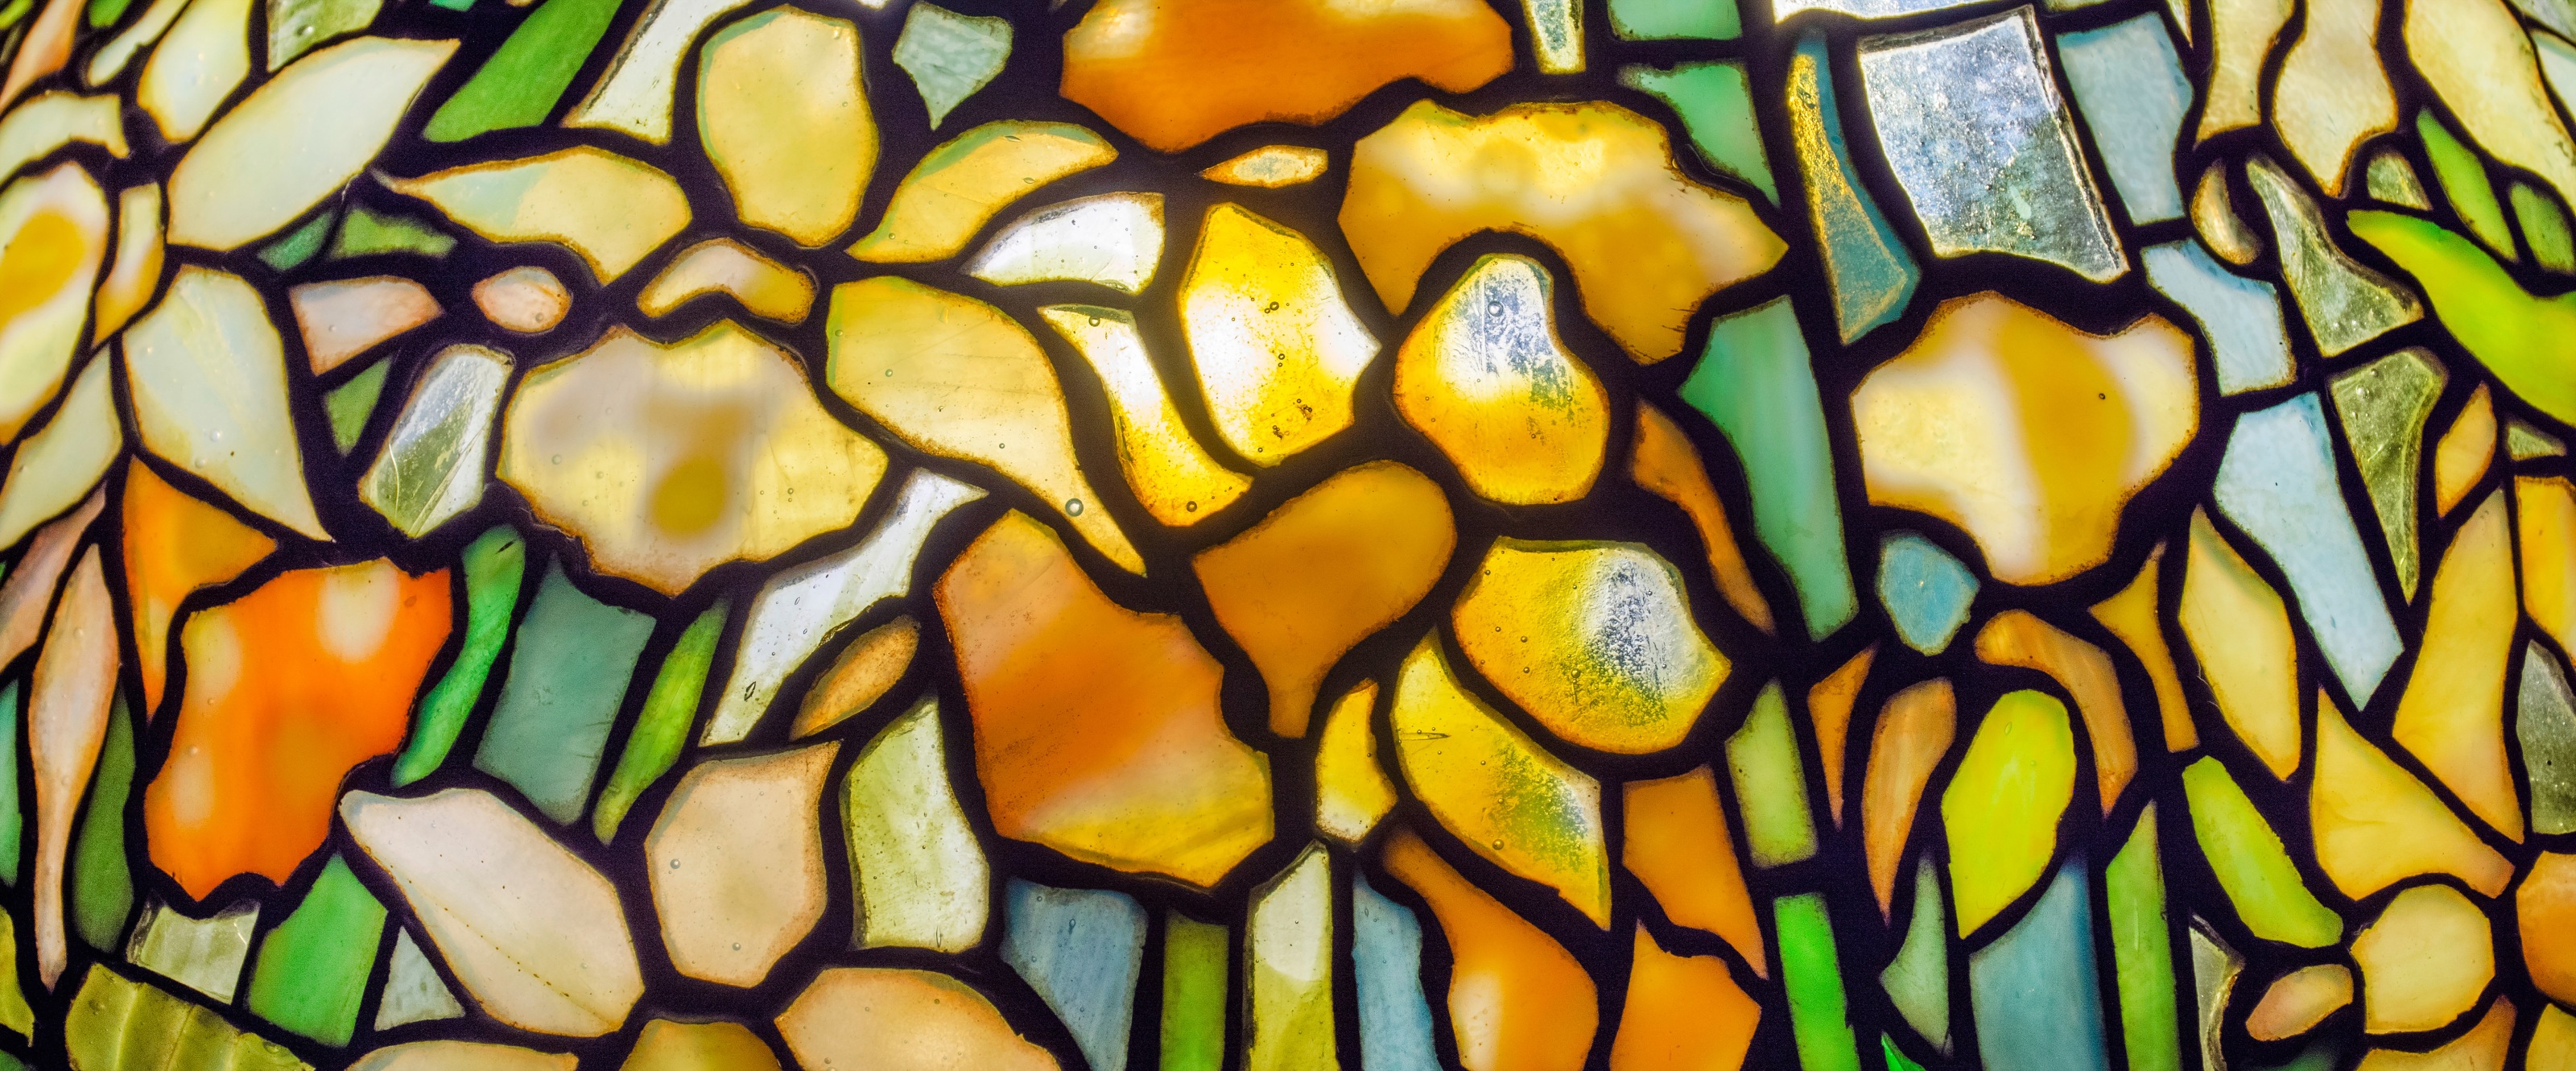 leaded glass tiffany lamp depicting daffodil blossoms in mottled yellow with spiky greenish blue leaves against a transparent glass background